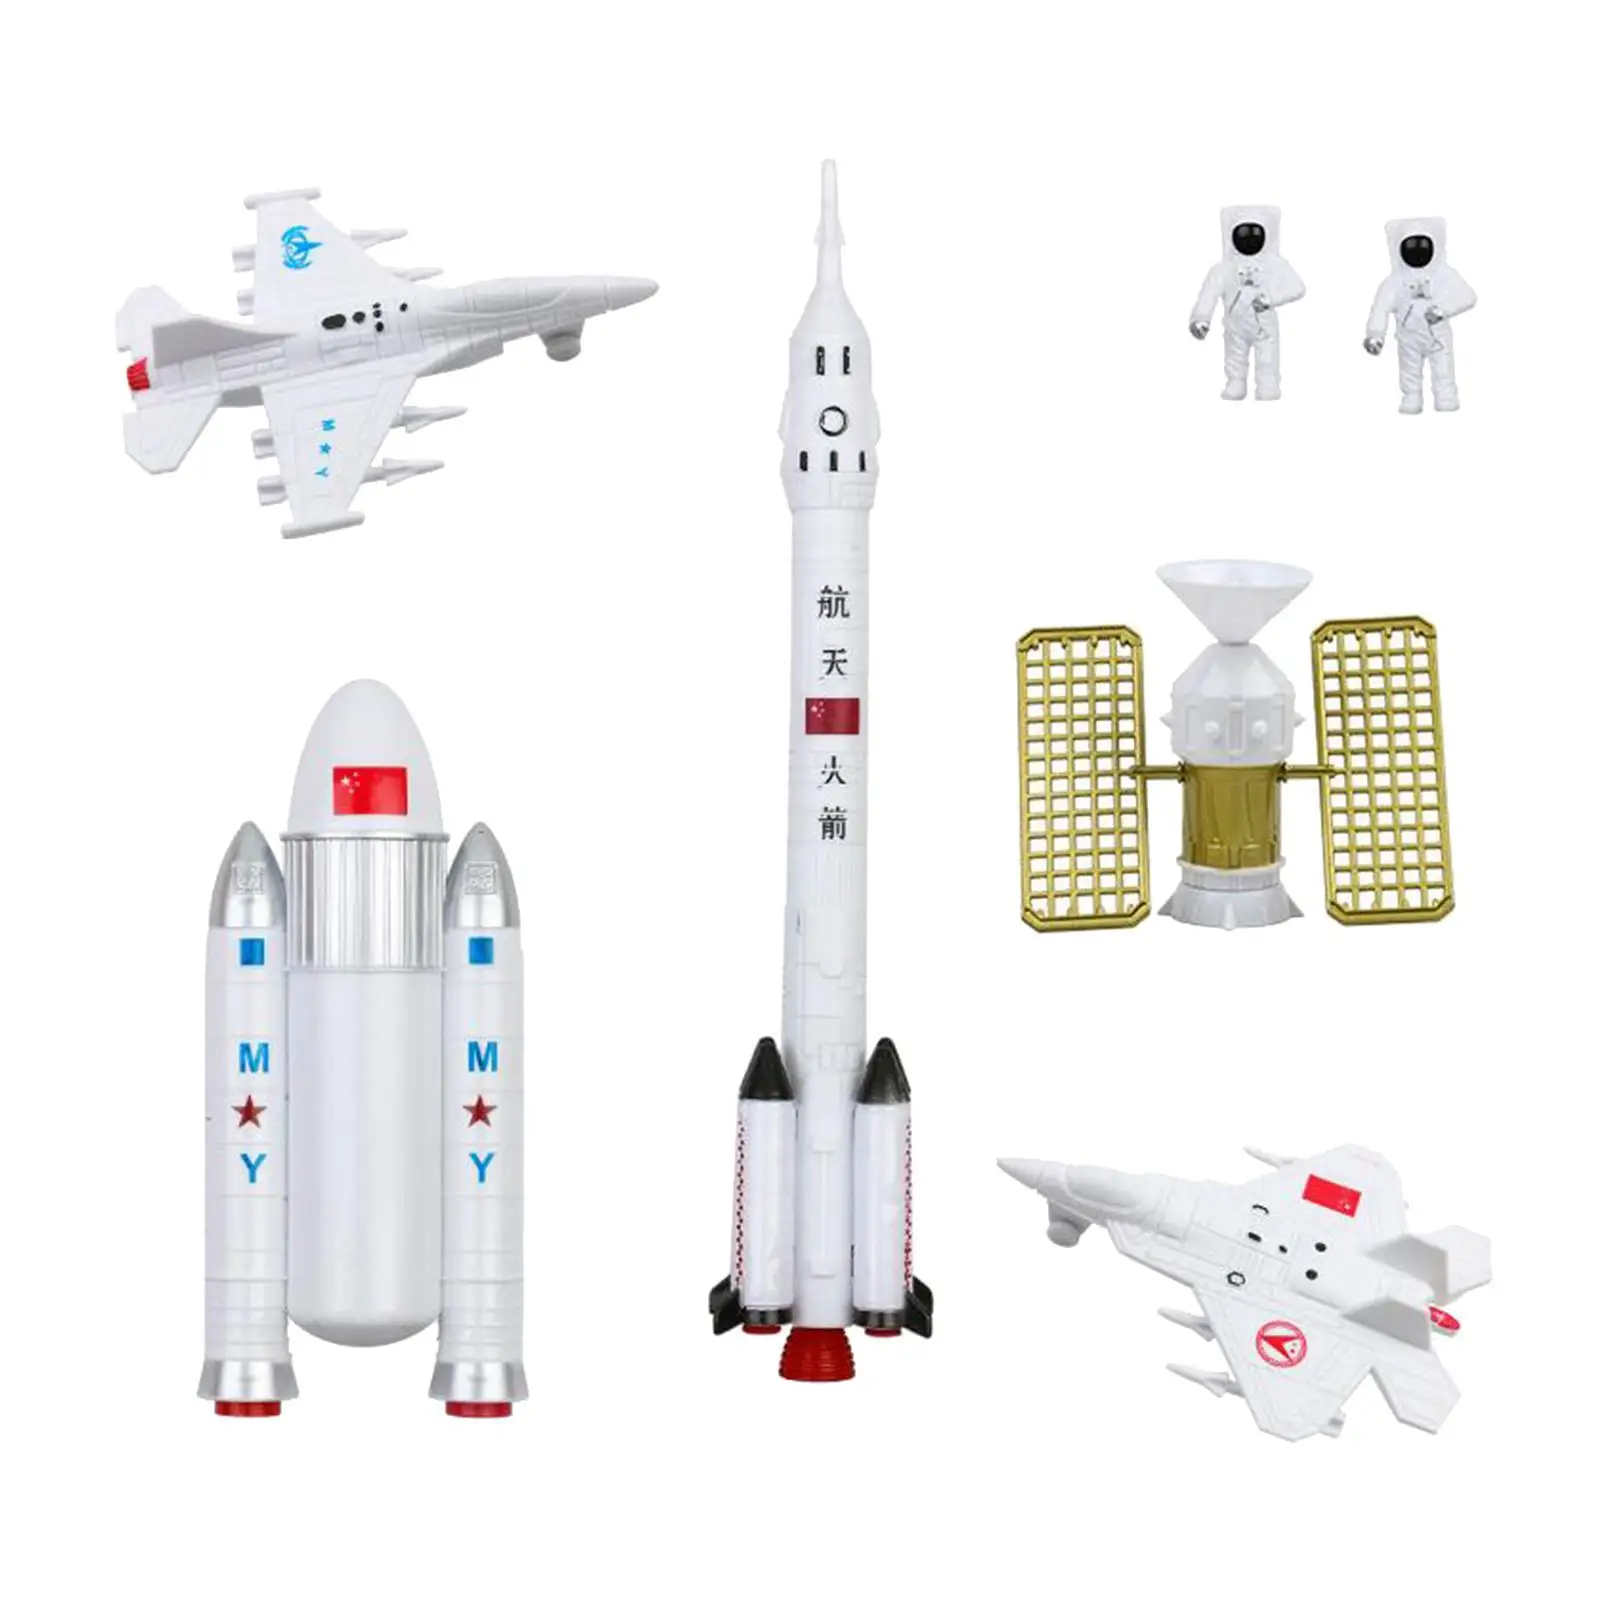 

7x Space Toys for Kids Space Exploration Toddlers Party Science Experiments